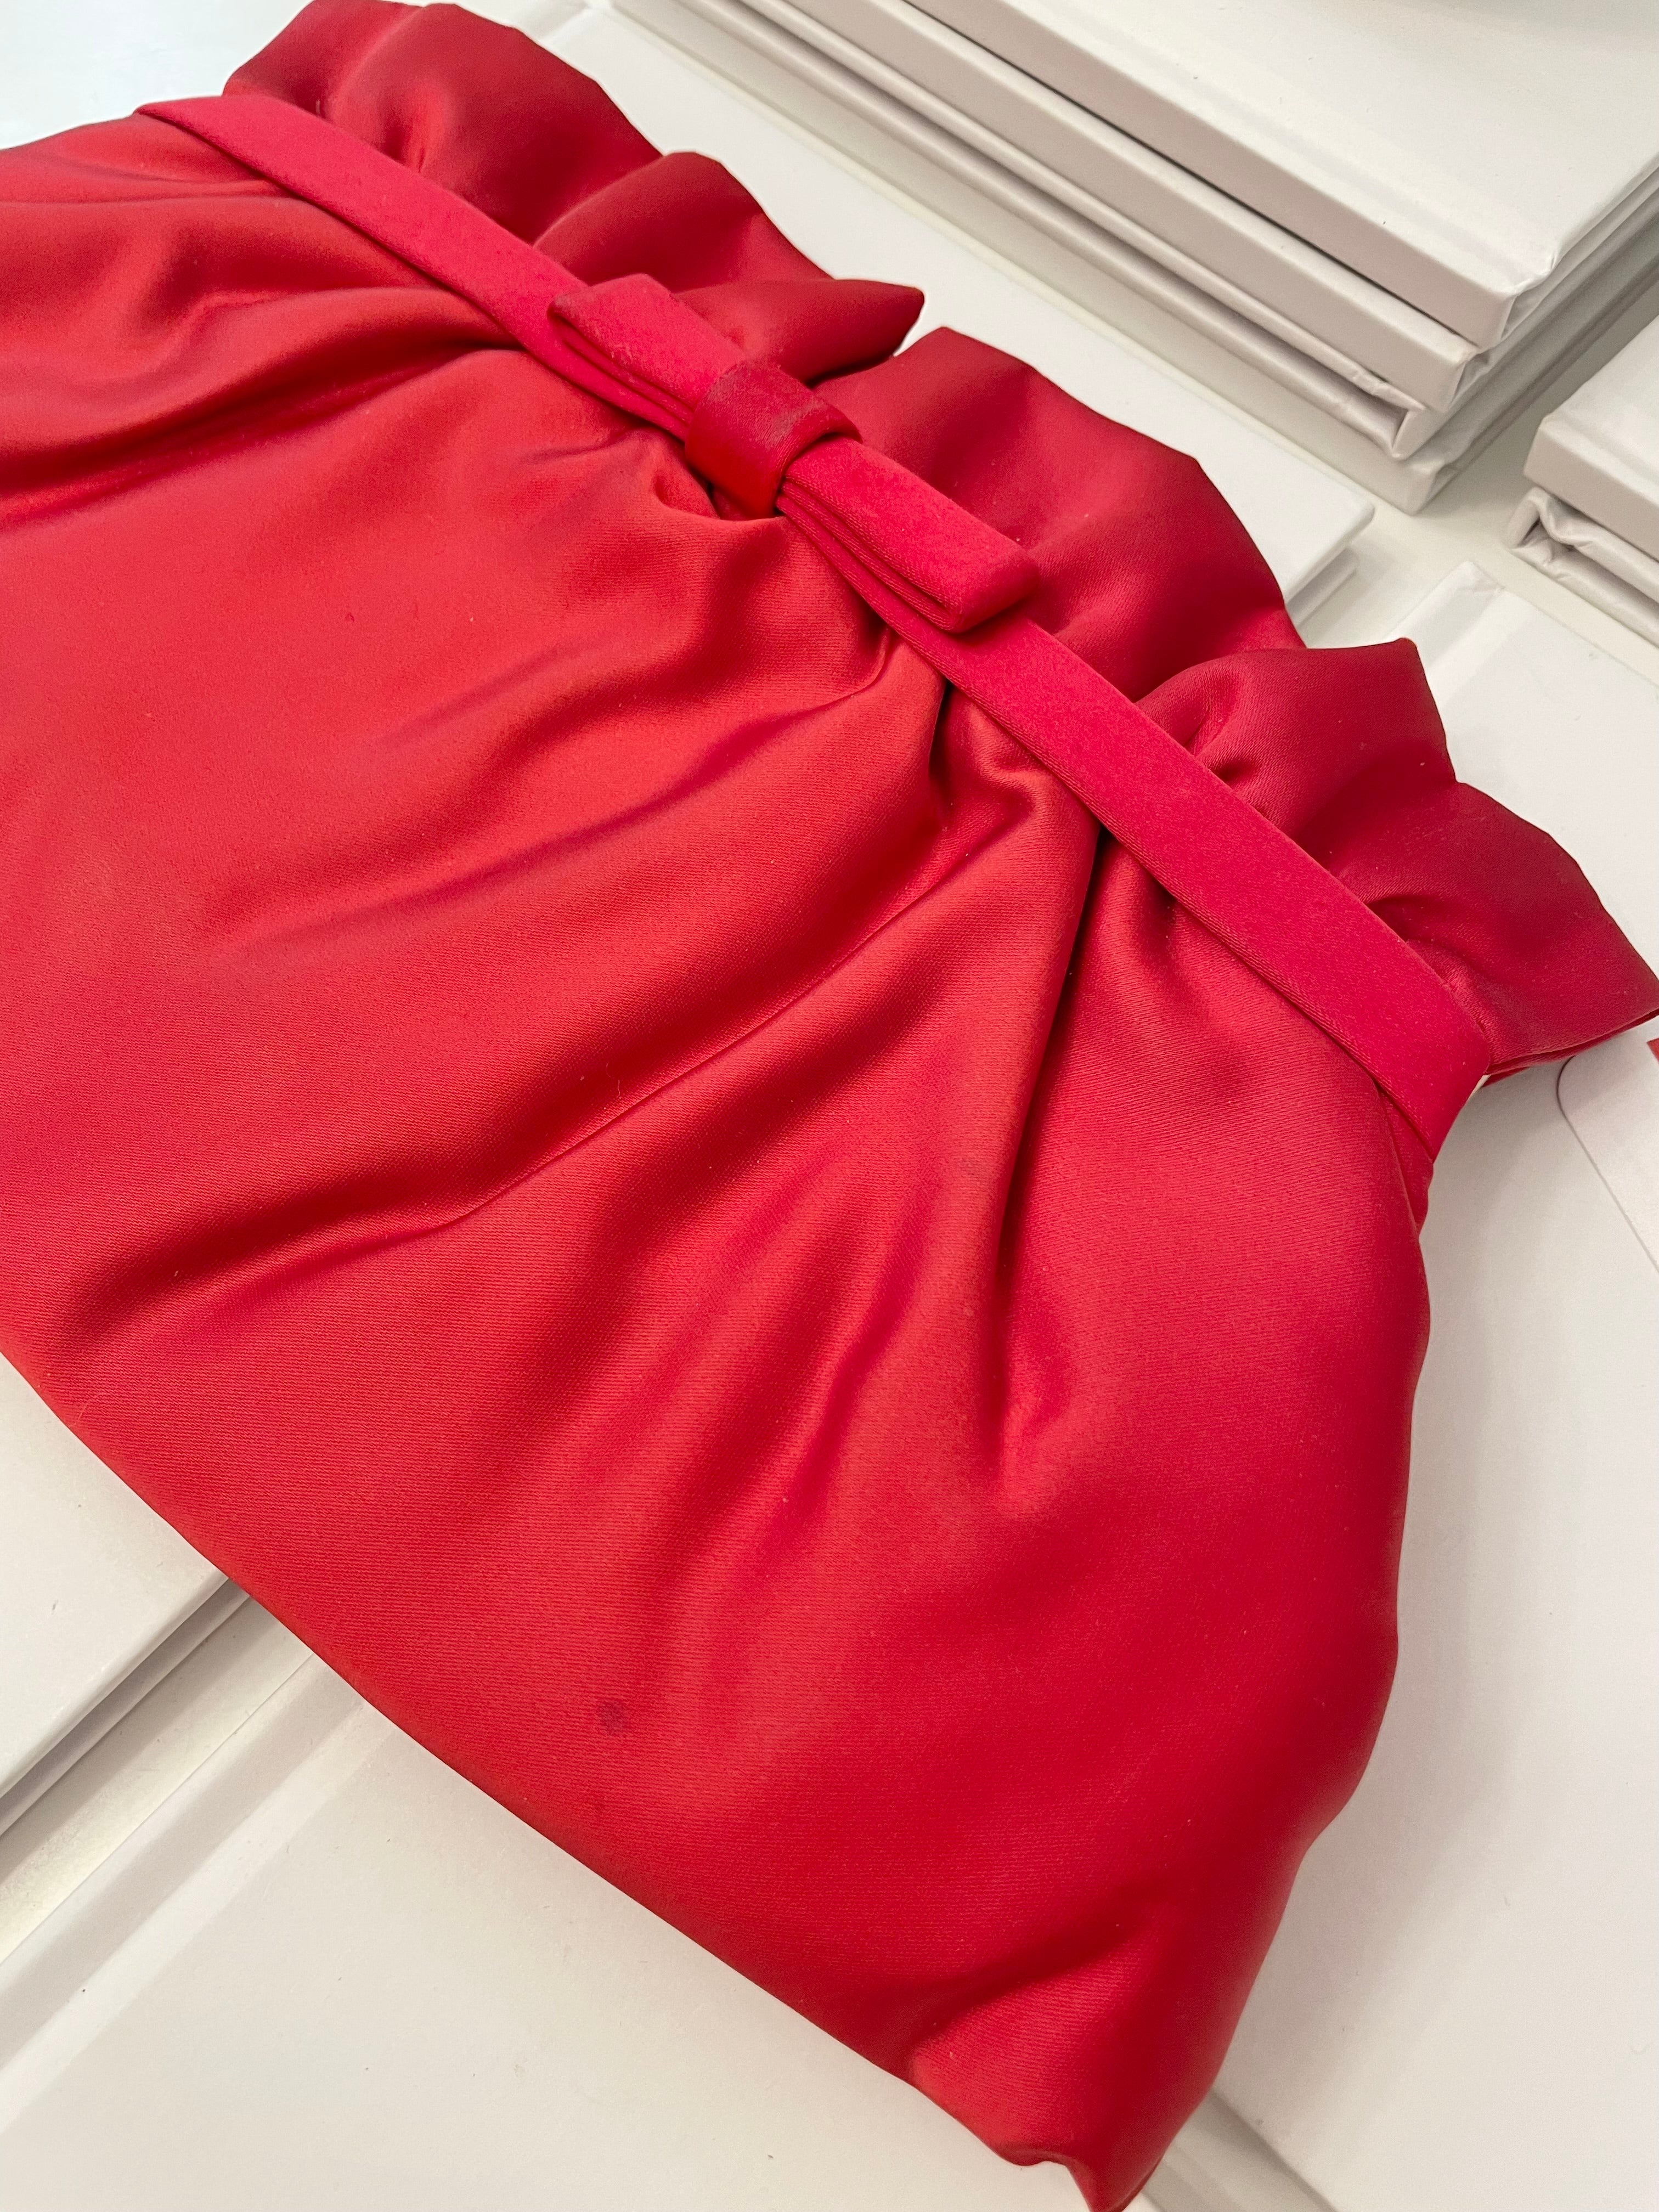 Vintage 1960's red satin classy bow clutch bag... so sassy